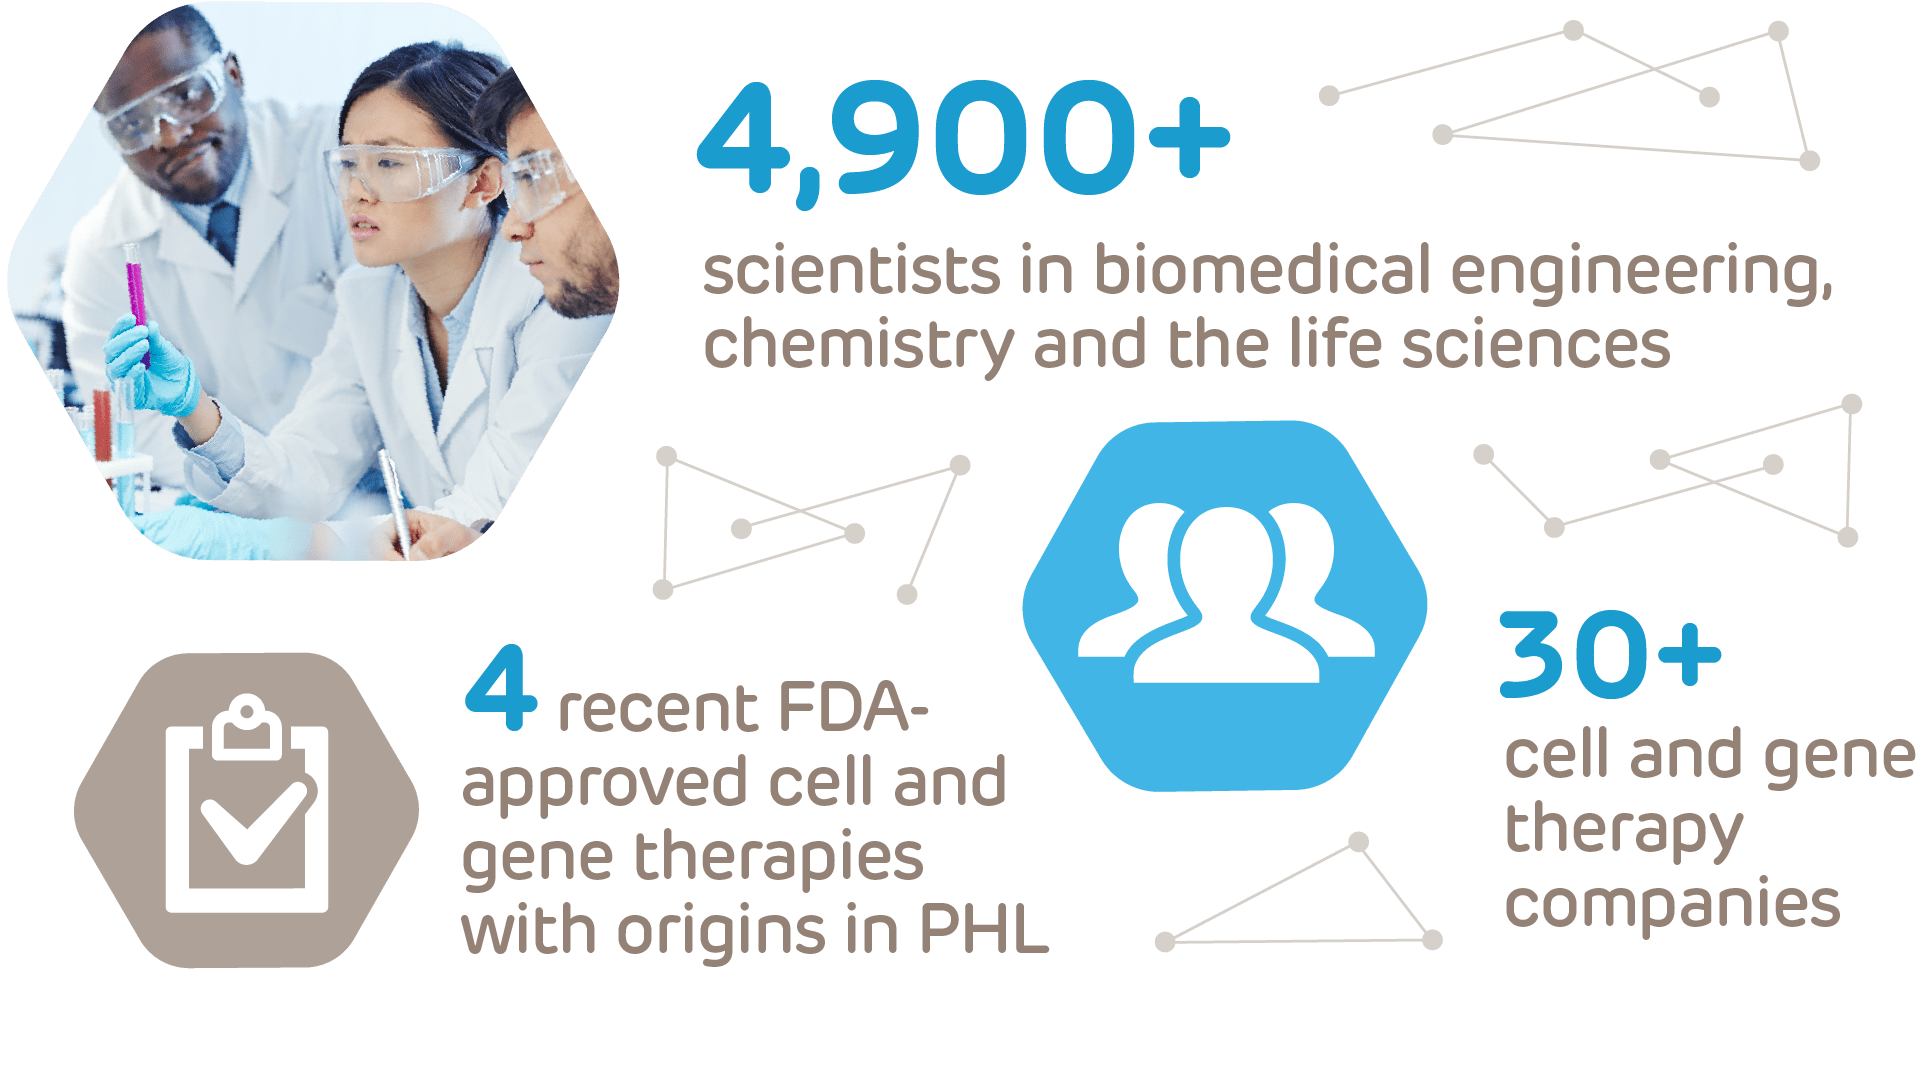 Info Graphic: 4,900+ scientists in biomedical engineering, chemistry and the life sciences. 4 recent FDA-approved cell and gene therapies with organs in PHL. 30+ cell and gene therapy companies.